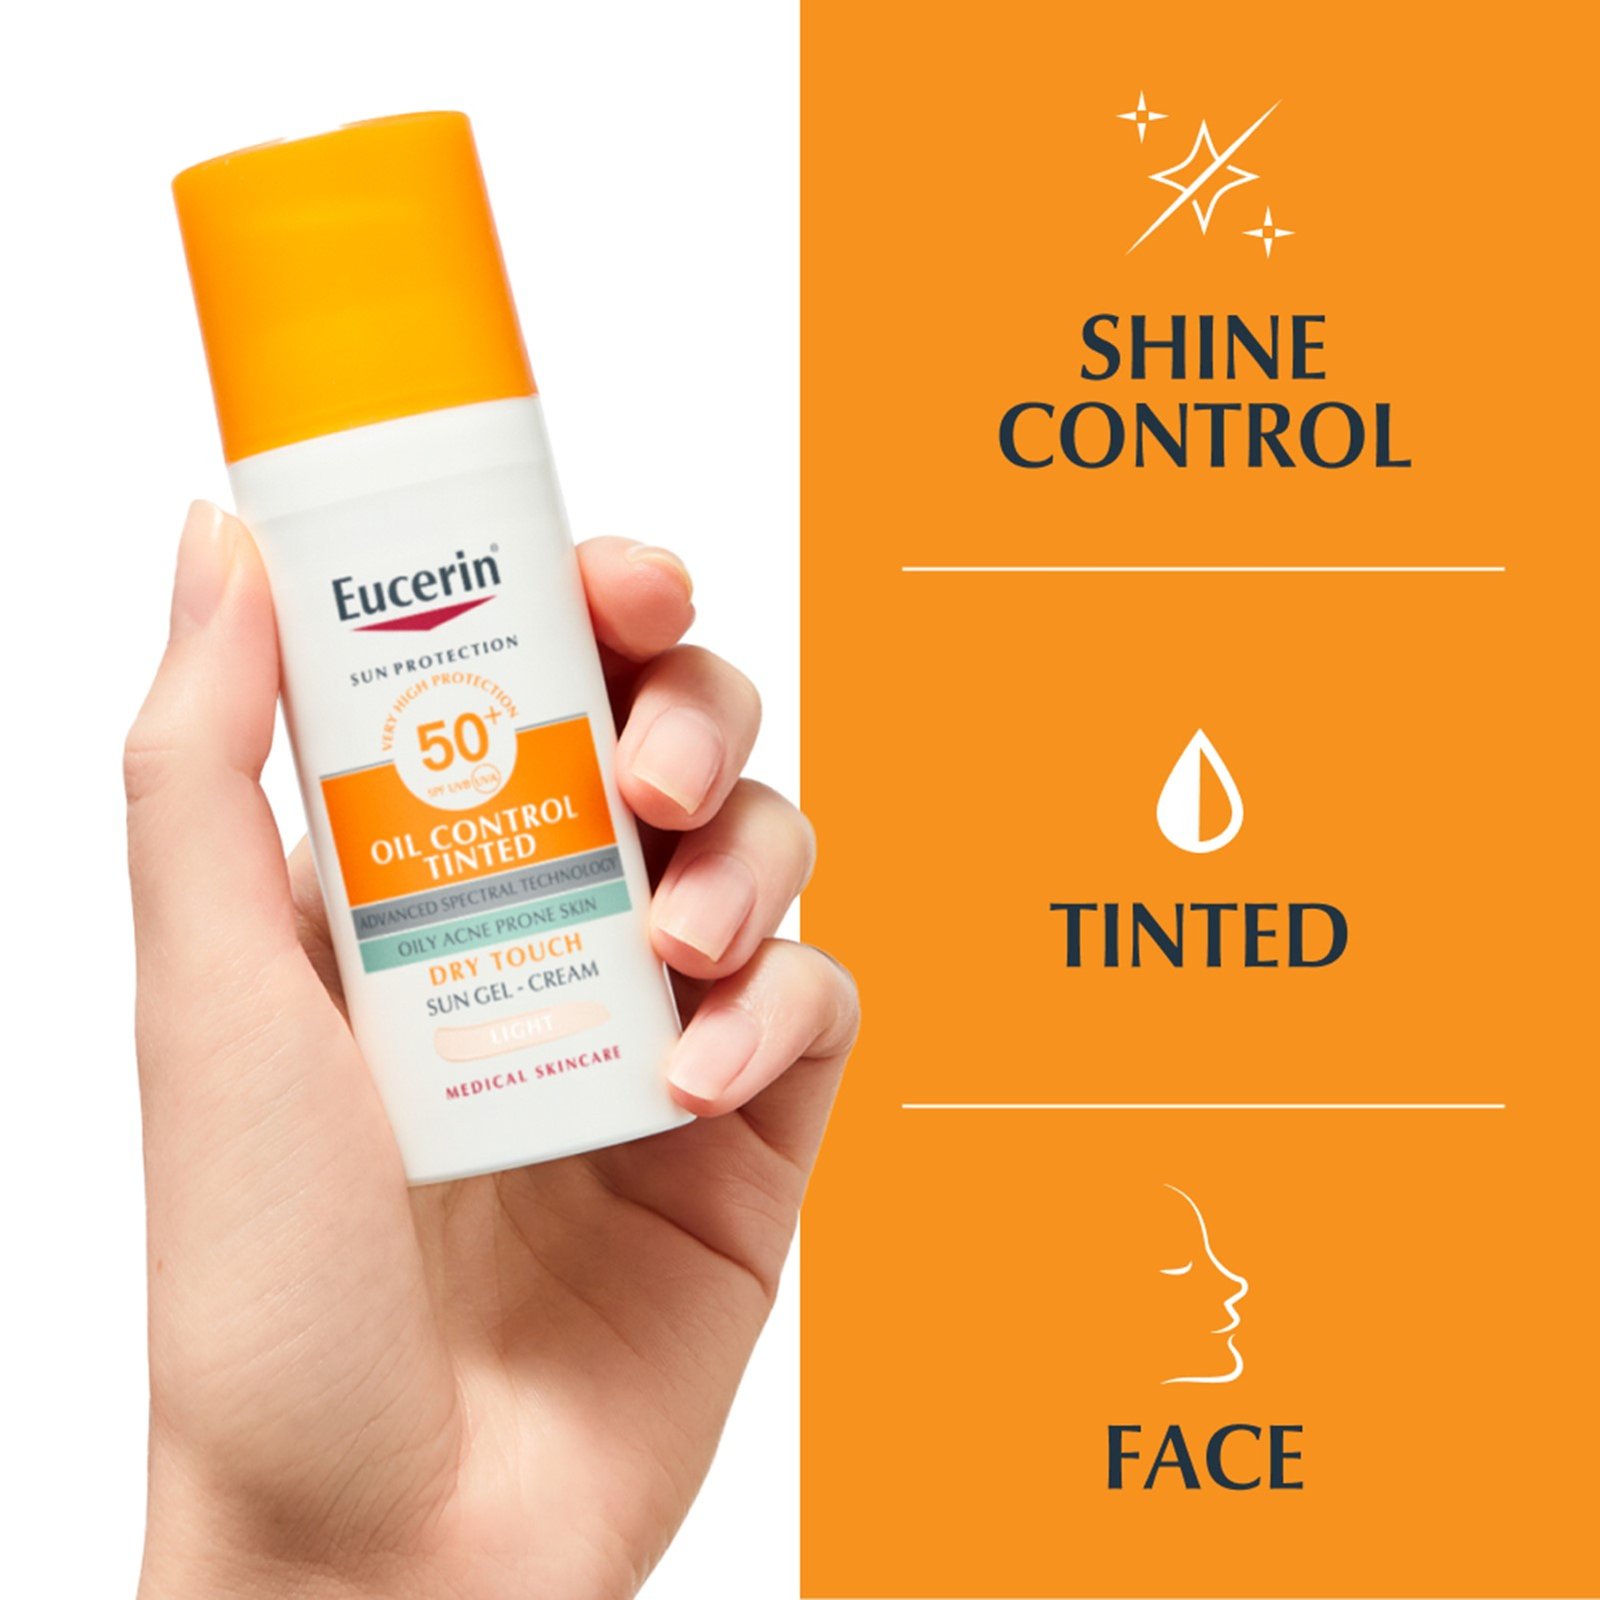 Buy Now - Eucerin Oil Control Sun Face Dry Touch Sunscreen Medium Tone SPF  50: Advanced Spectral Technology with UVA/UVB Sunscreens, Licochalcone A,  Glycyrrhetinic Acid and Carnitine for Skin Prone to Acne